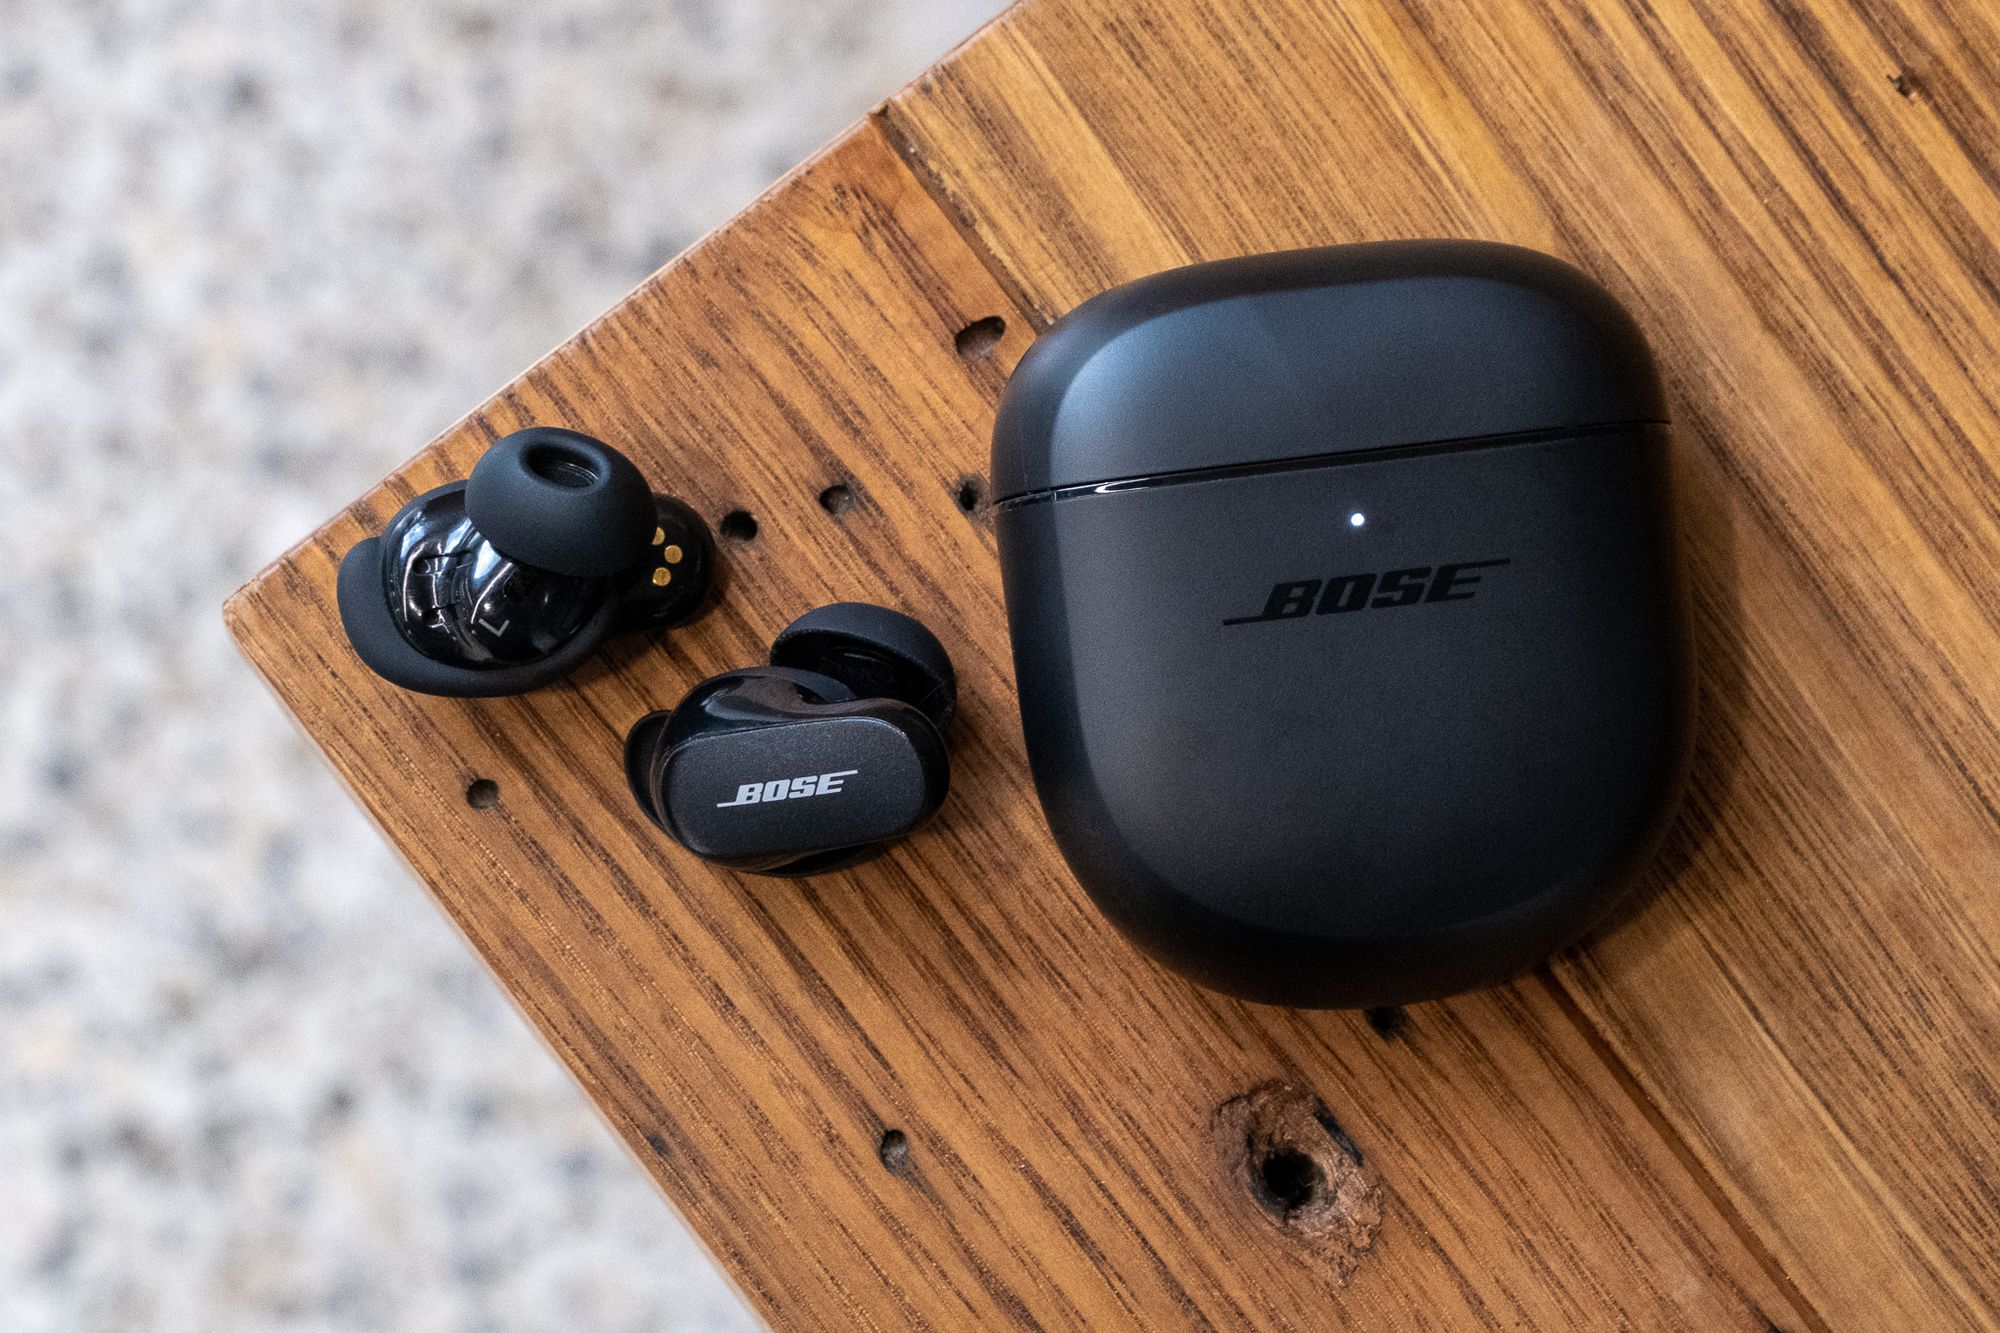 Bose II noise cancellation domination - The